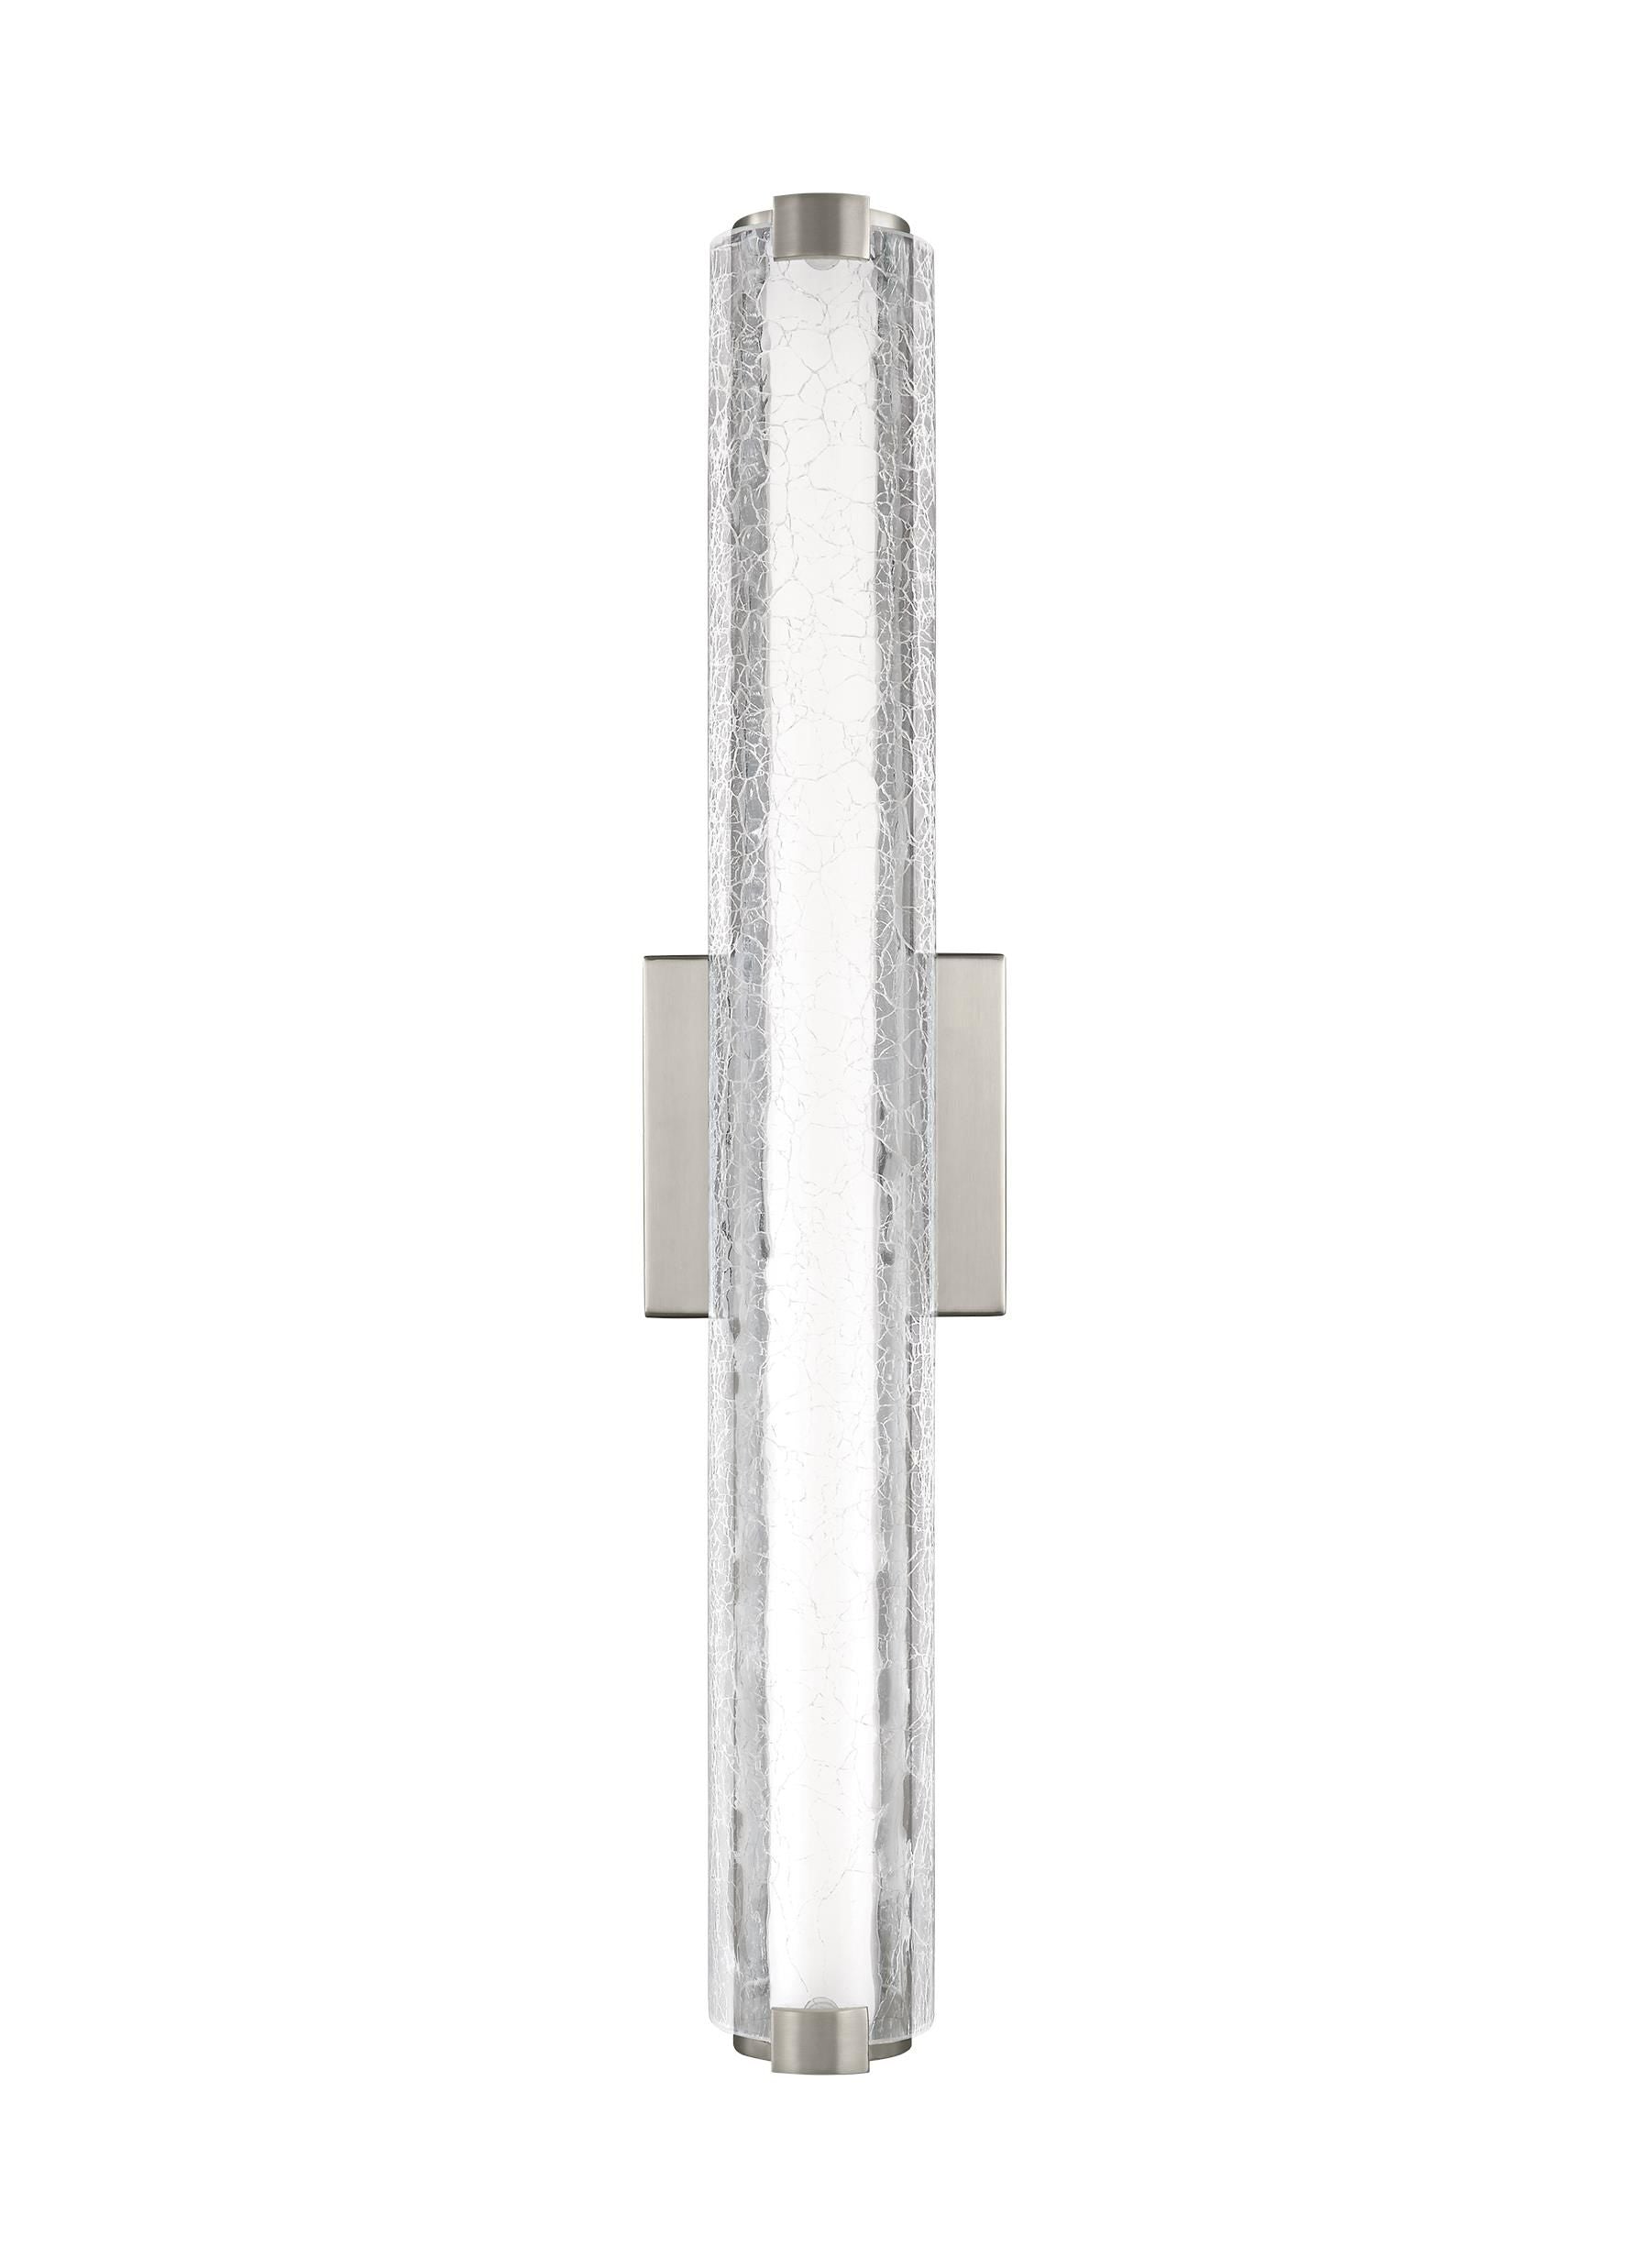 Cutler Bathroom sconce Stainless steel - WB1868SN-L1 | FEISS